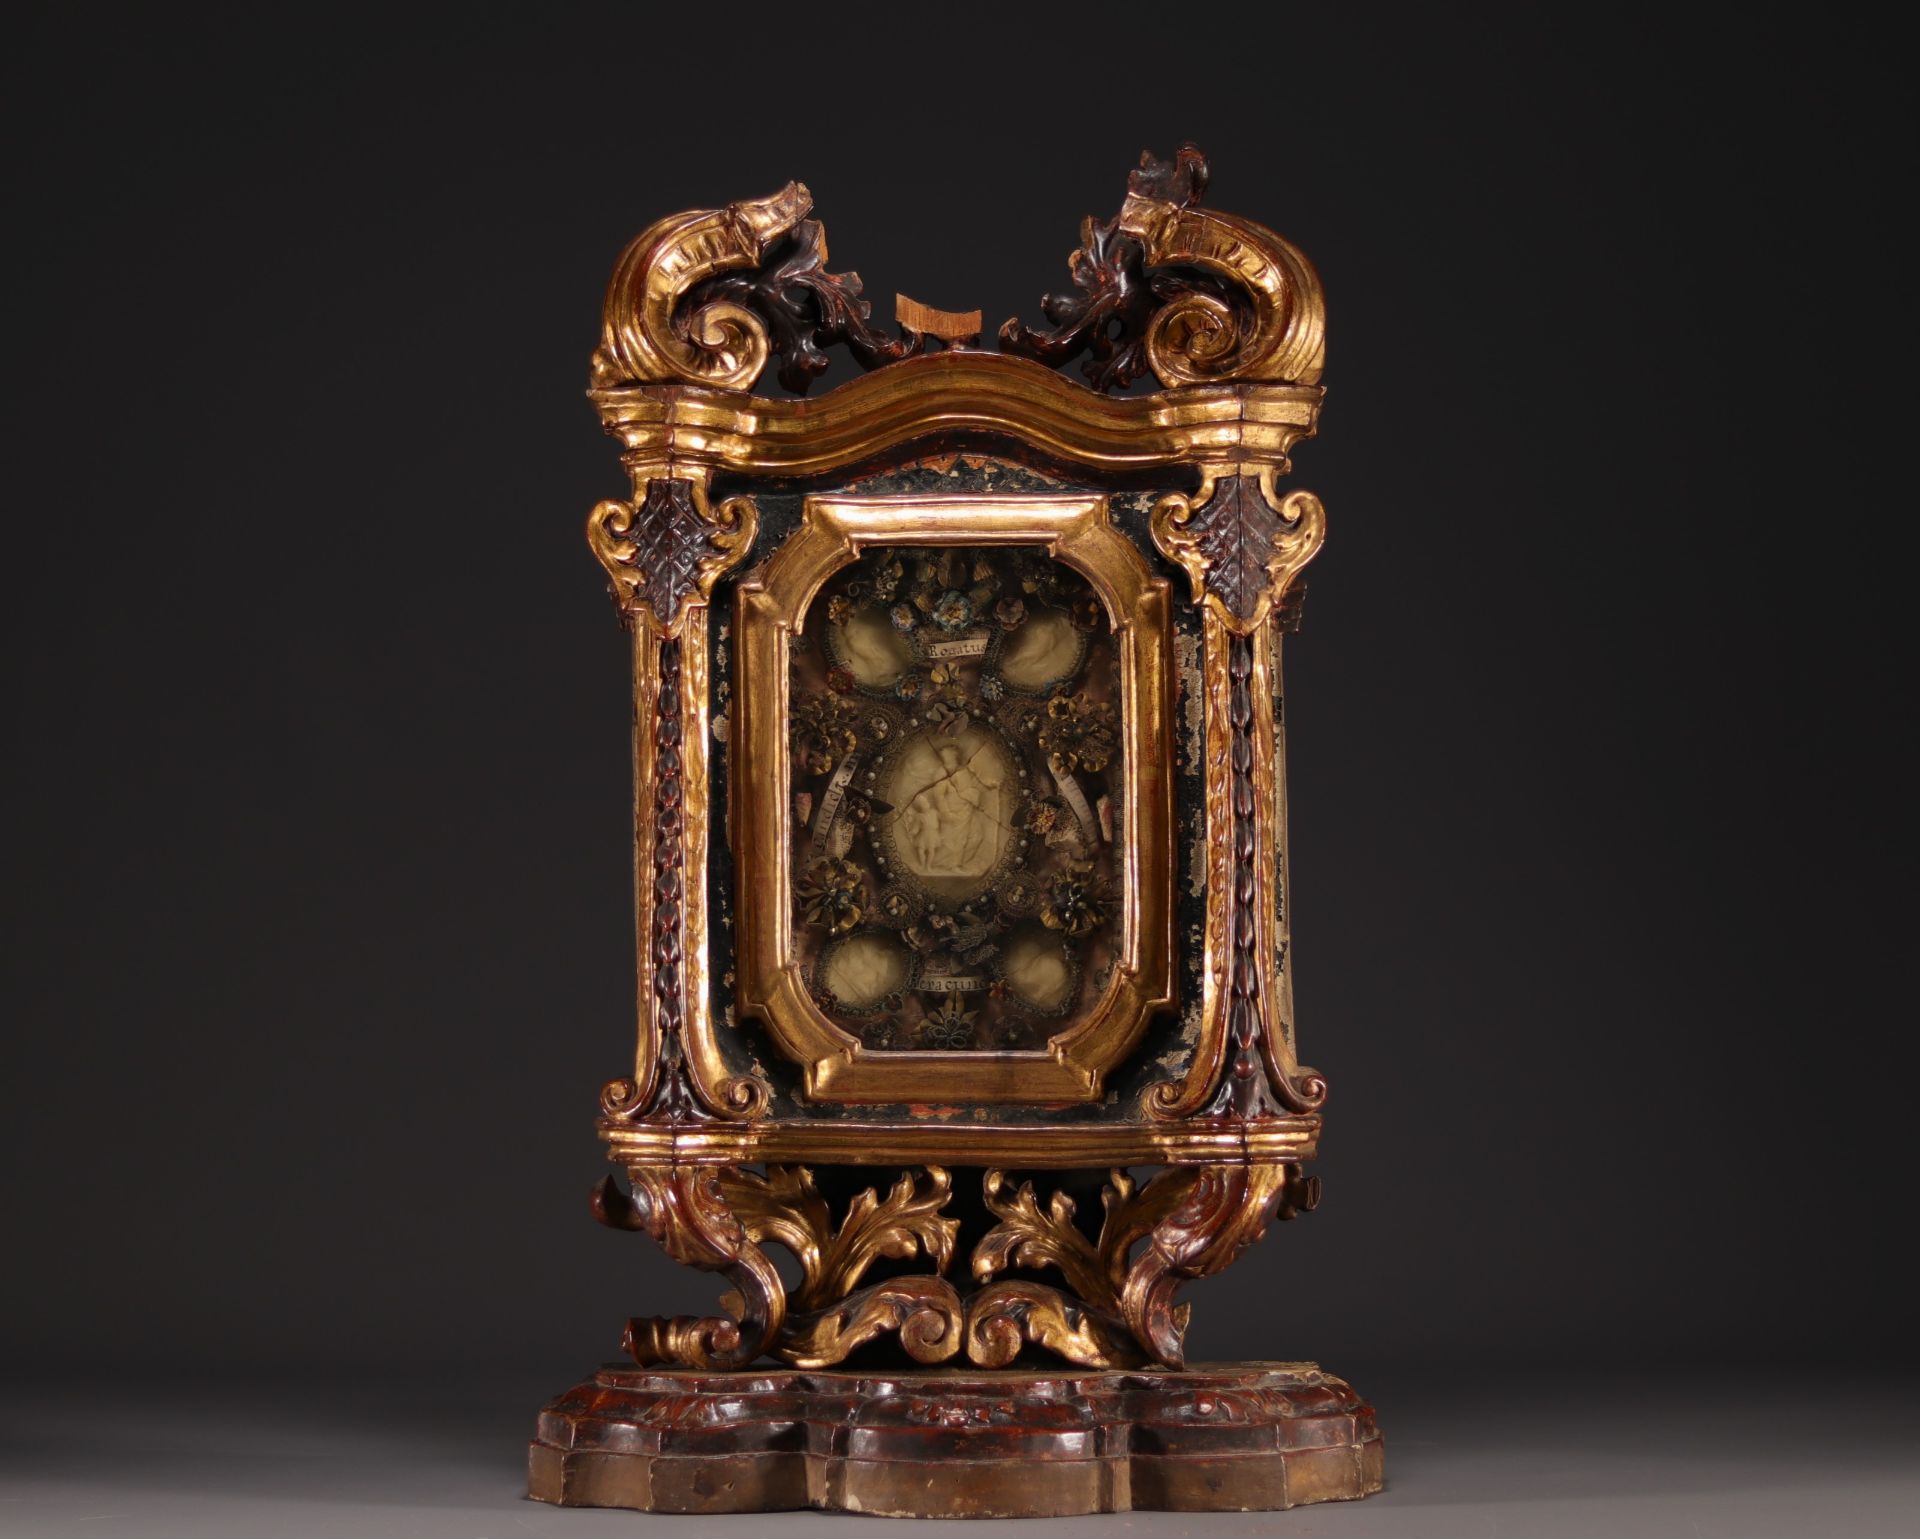 Imposing Louis XIV reliquary in carved and gilded wood, wax medallions. 17th-18th century.